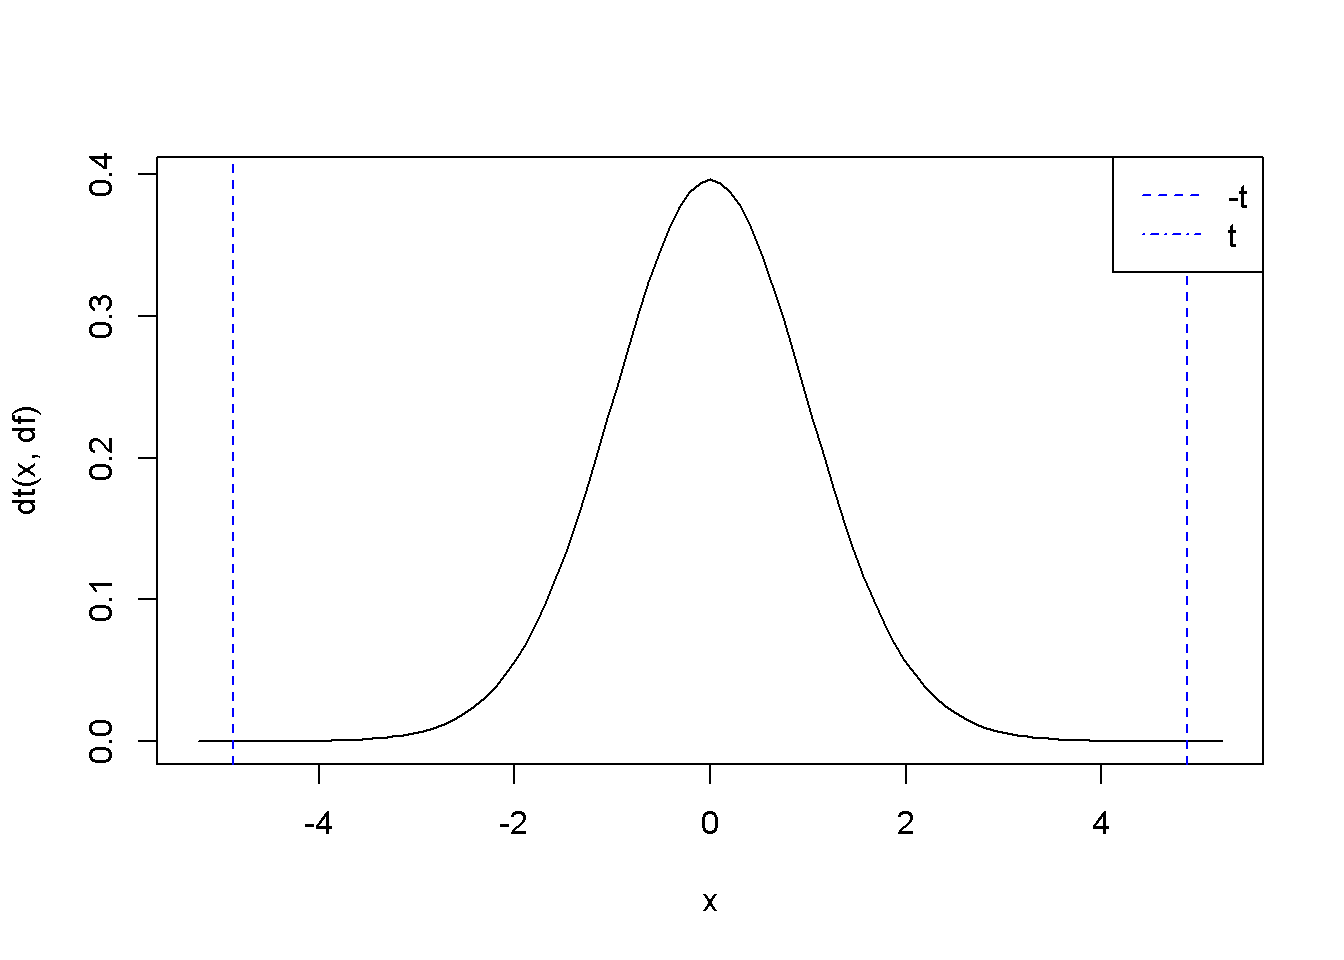 The $p$-value in two-tail hypothesis testing